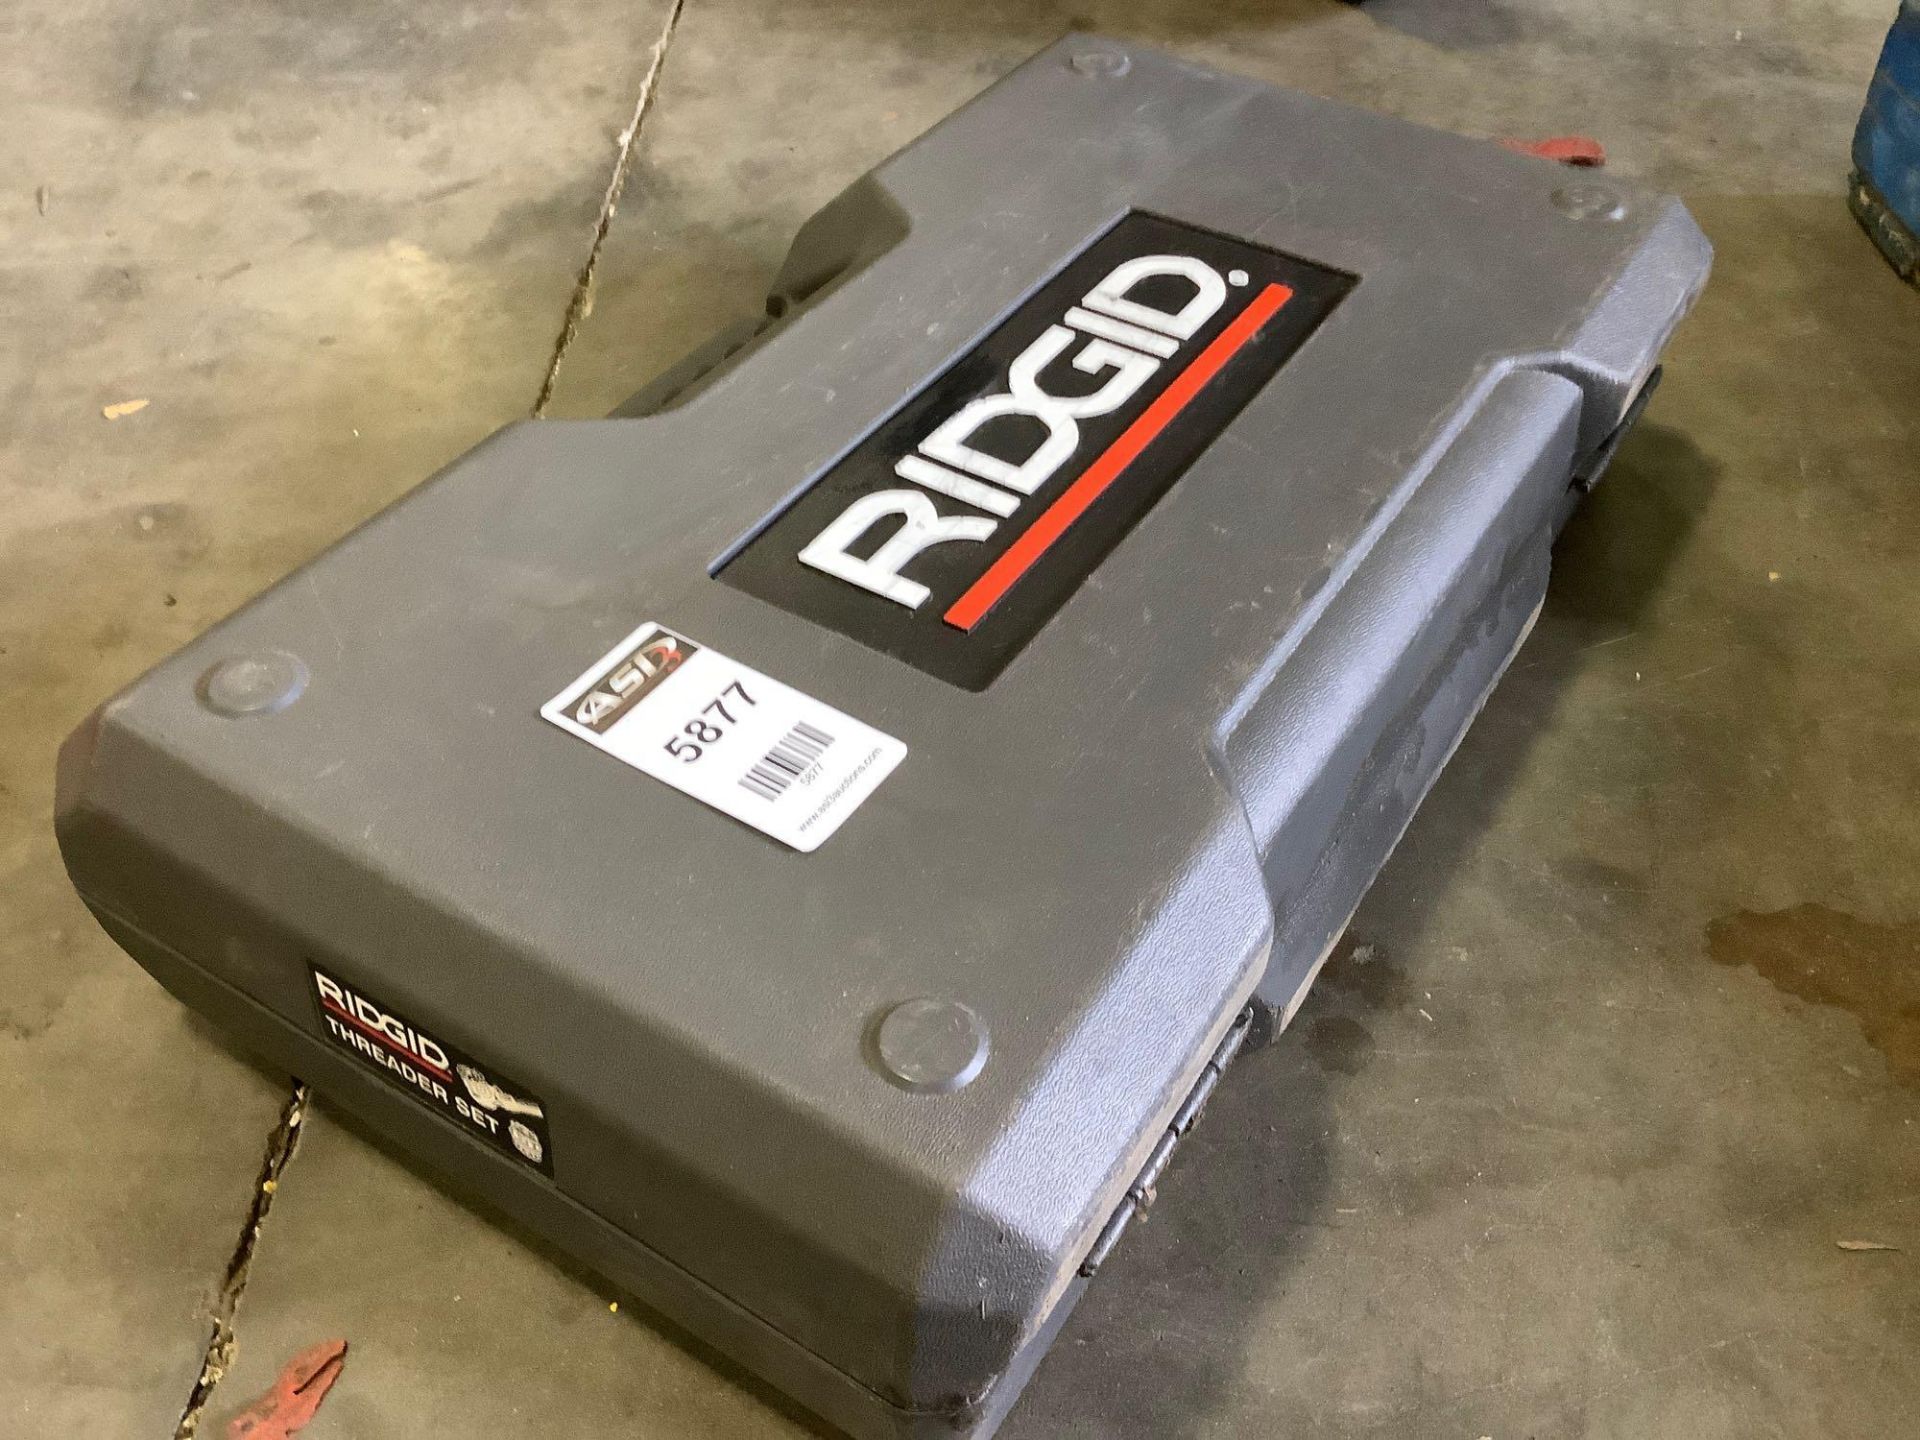 MANUAL RIDGID THREADER SET WITH CARRYING CASE - Image 6 of 6